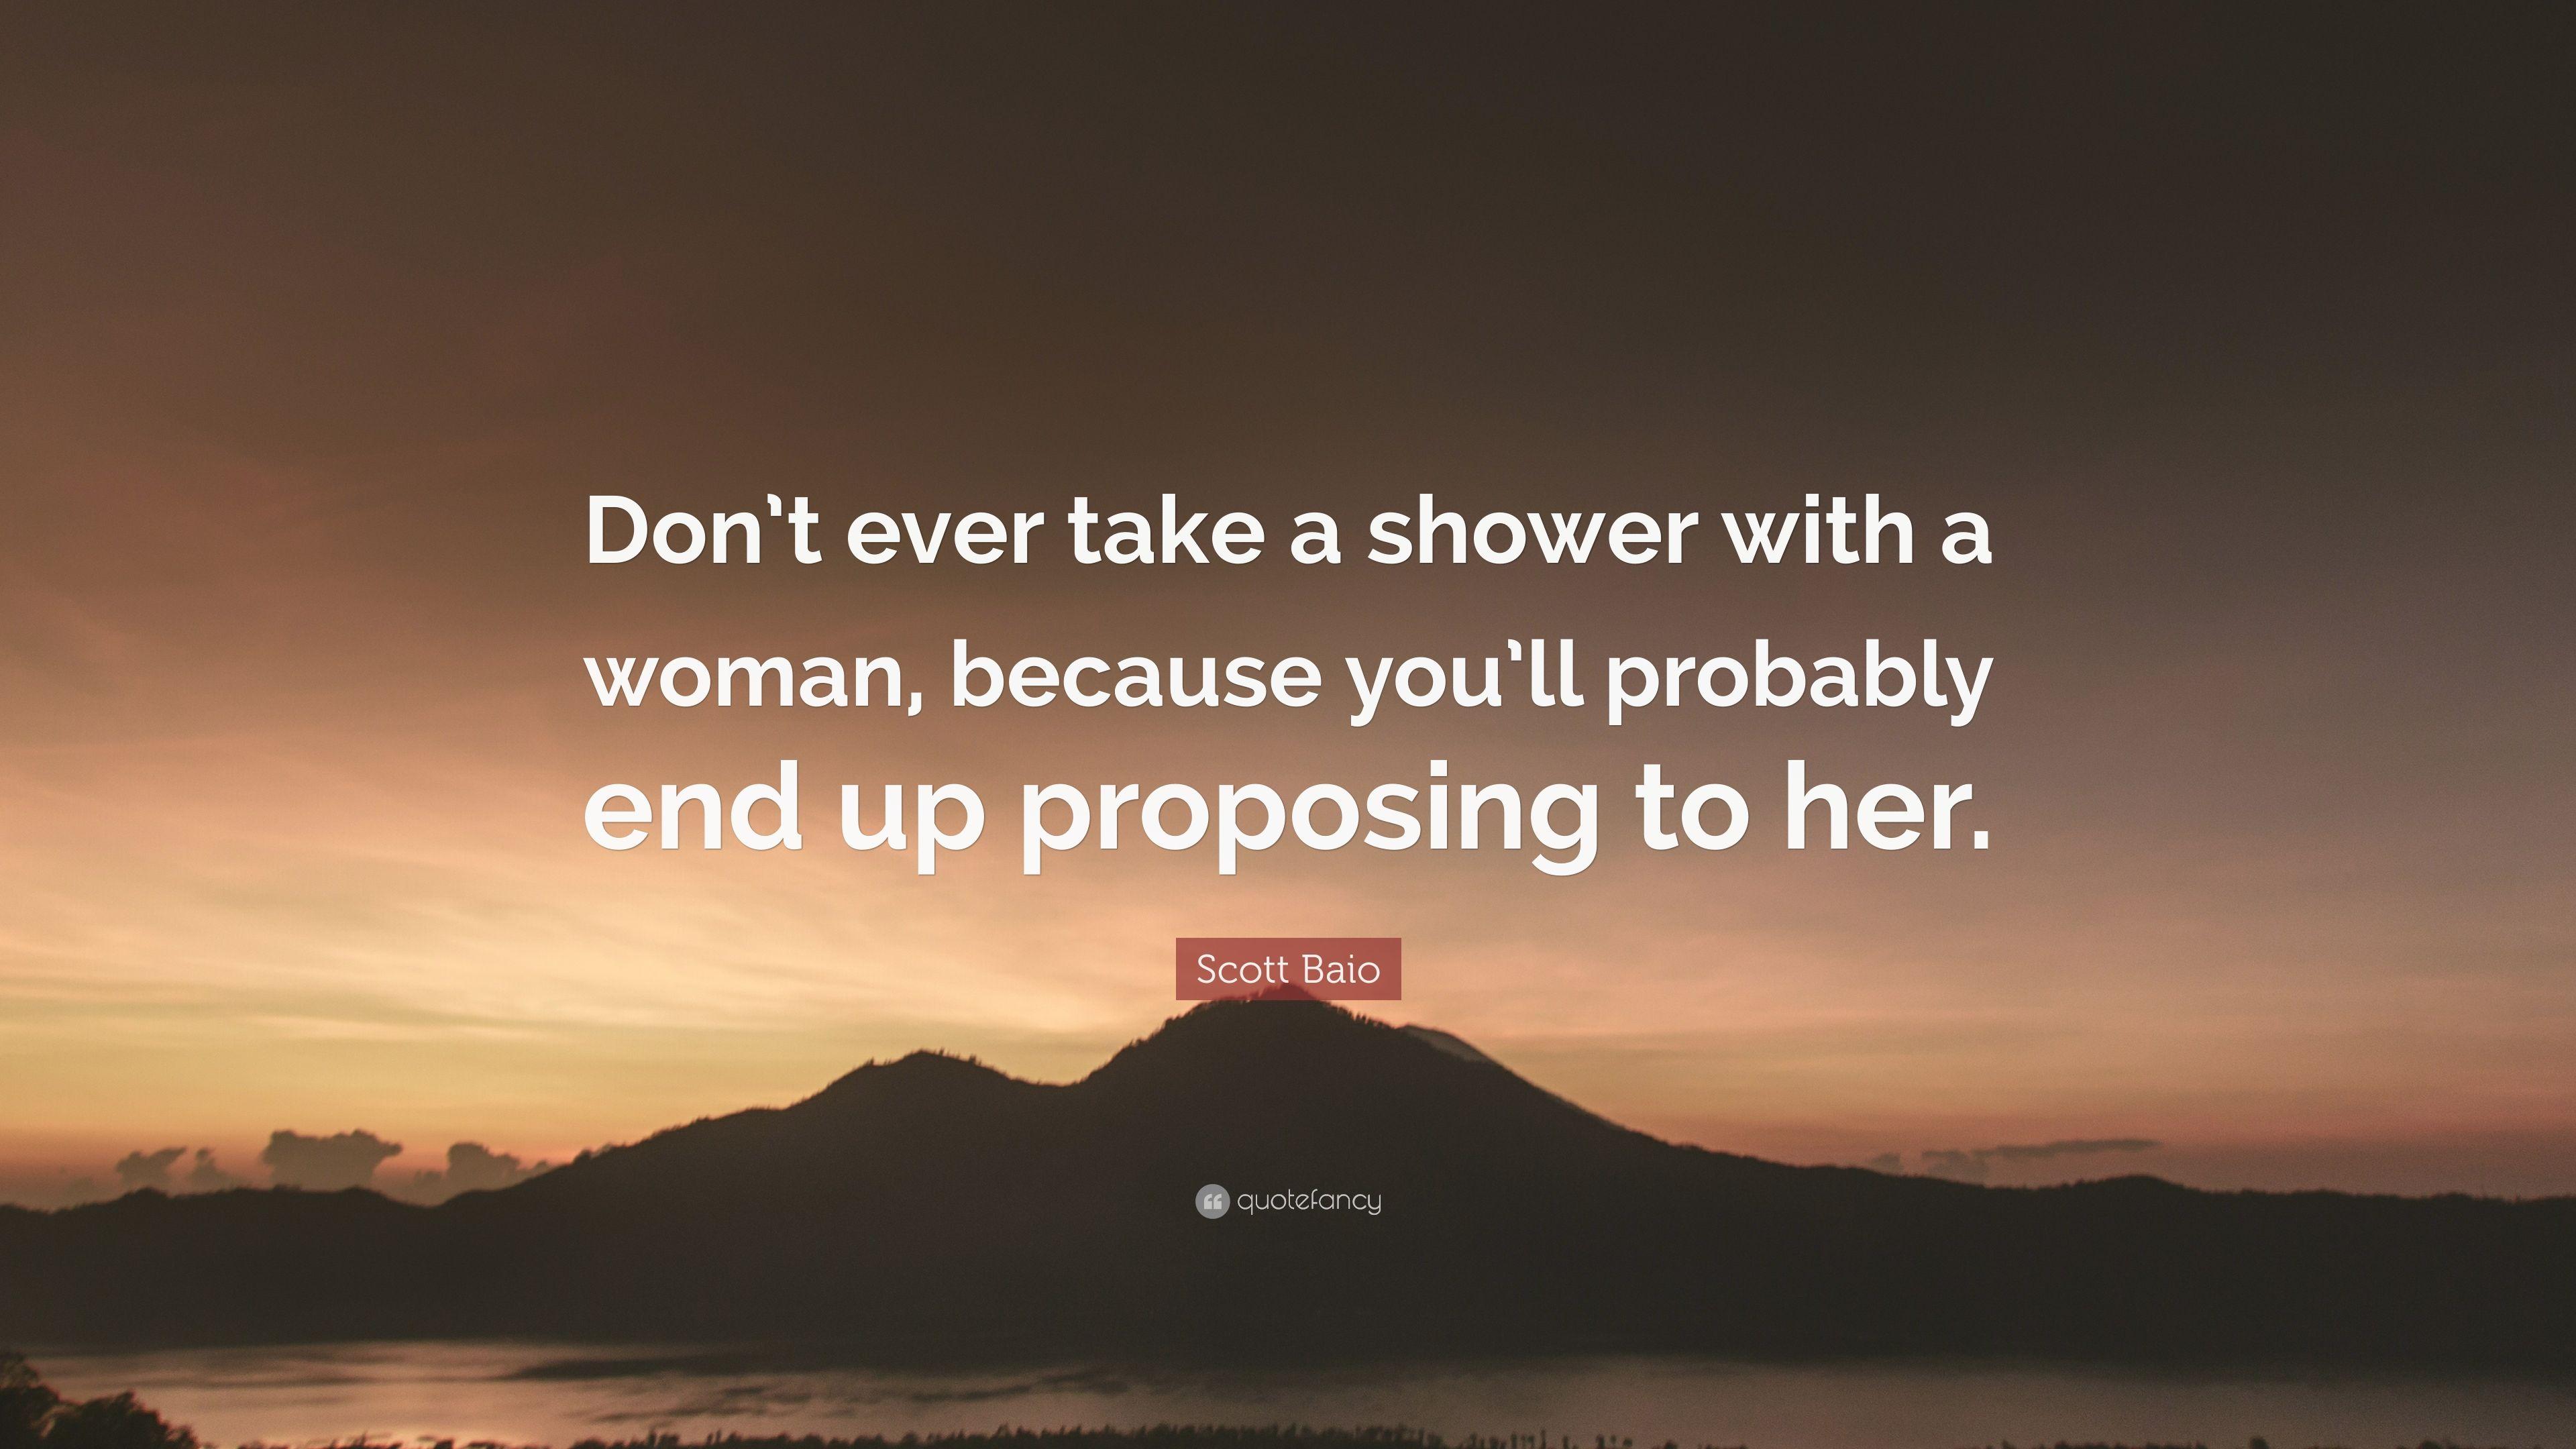 Scott Baio Quote: “Don't ever take a shower with a woman, because